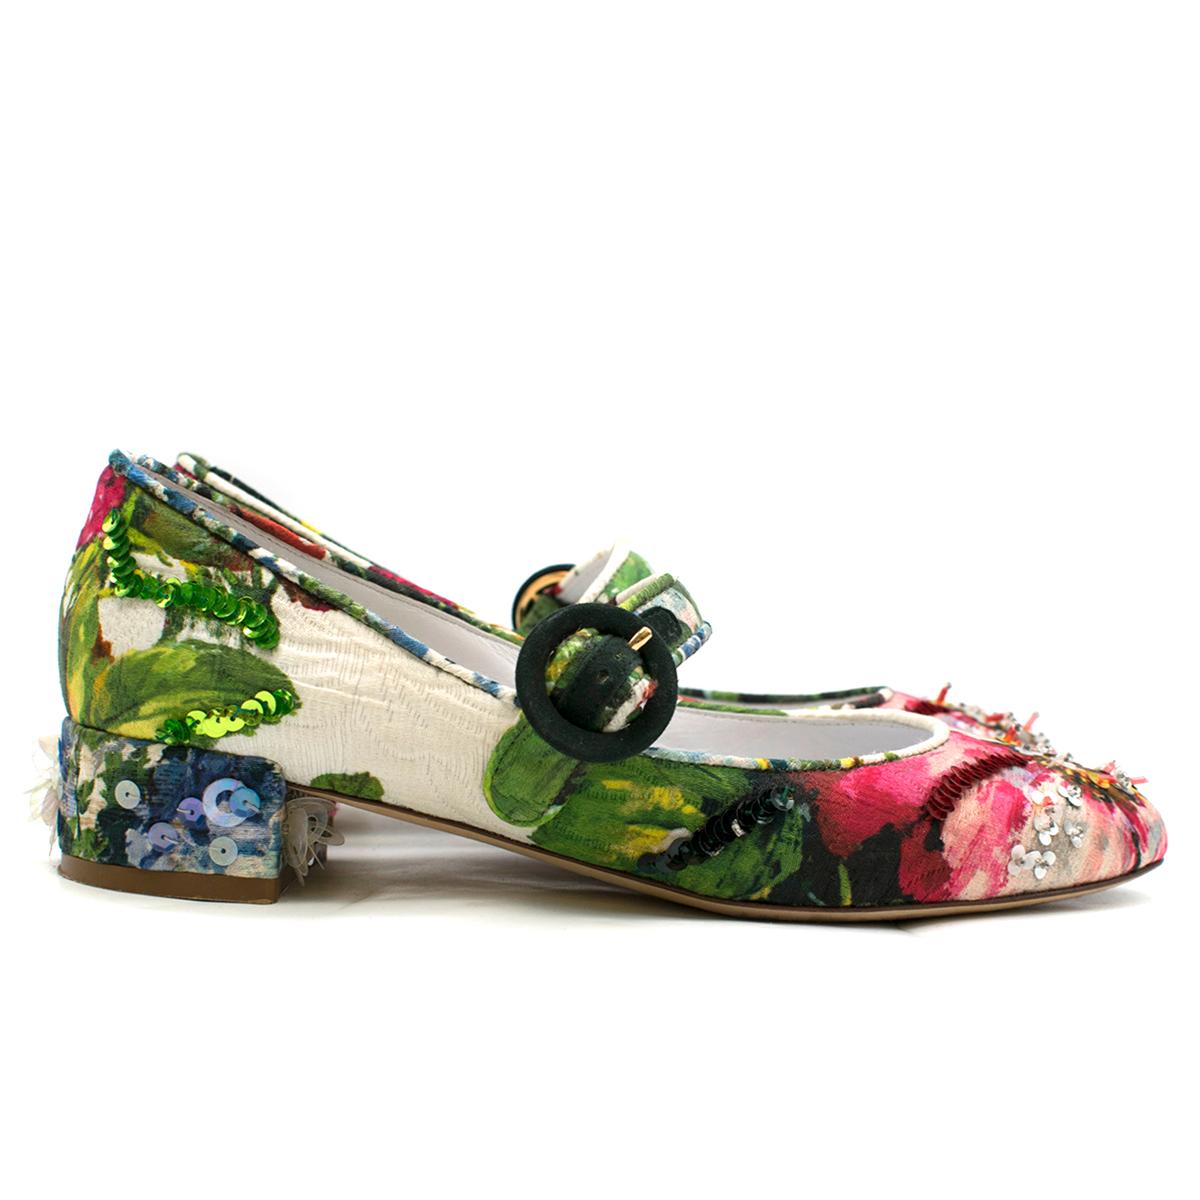 Dolce& Gabbana Floral Printed Pumps

- Floral printed pumps with multi-coloured beads on the toes and heels 
- Round and closed toe 
- Covered snap closure 
- The item comes with a dust bag 


Please note, these items are pre-owned and may show some